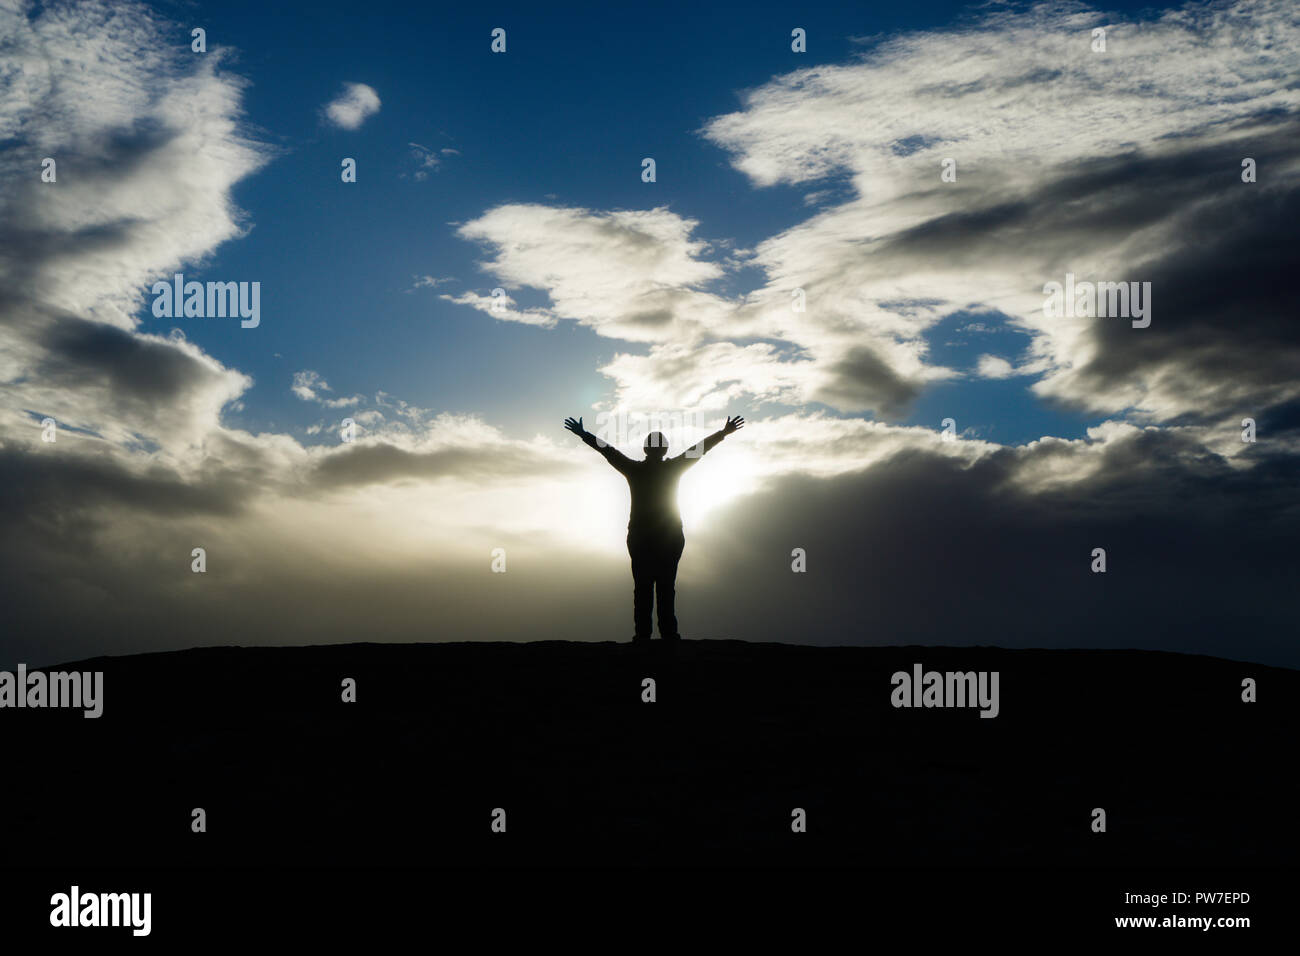 Silhouette of person standing with arms out as sun breaks through clouds. Stock Photo